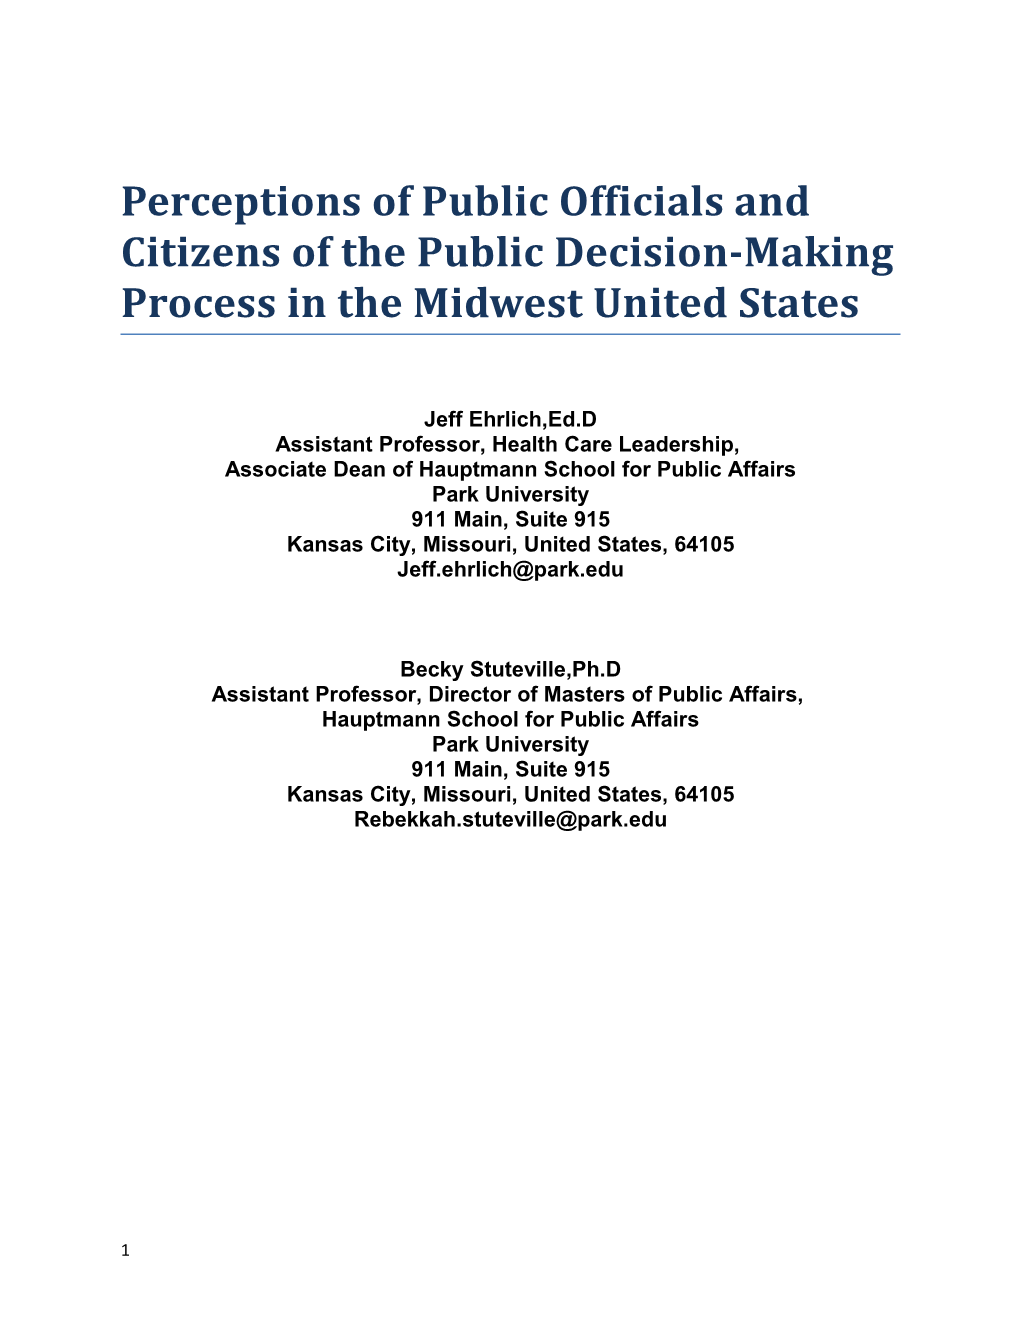 Perceptions of Public Officials and Citizens of the Public Decision-Making Process in The